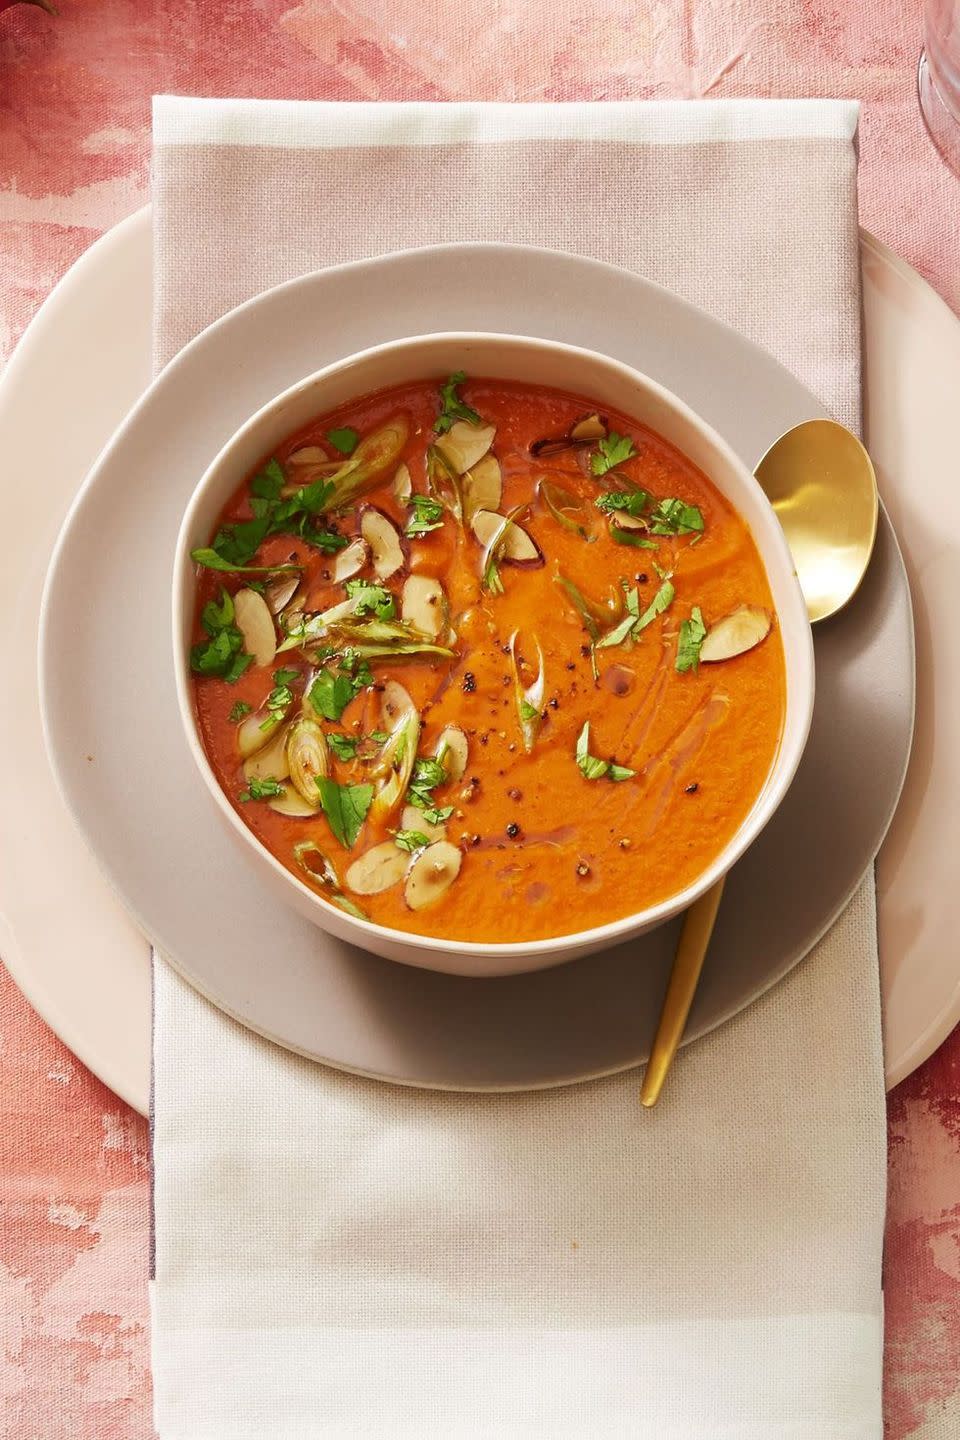 15) Roasted Red Pepper Soup